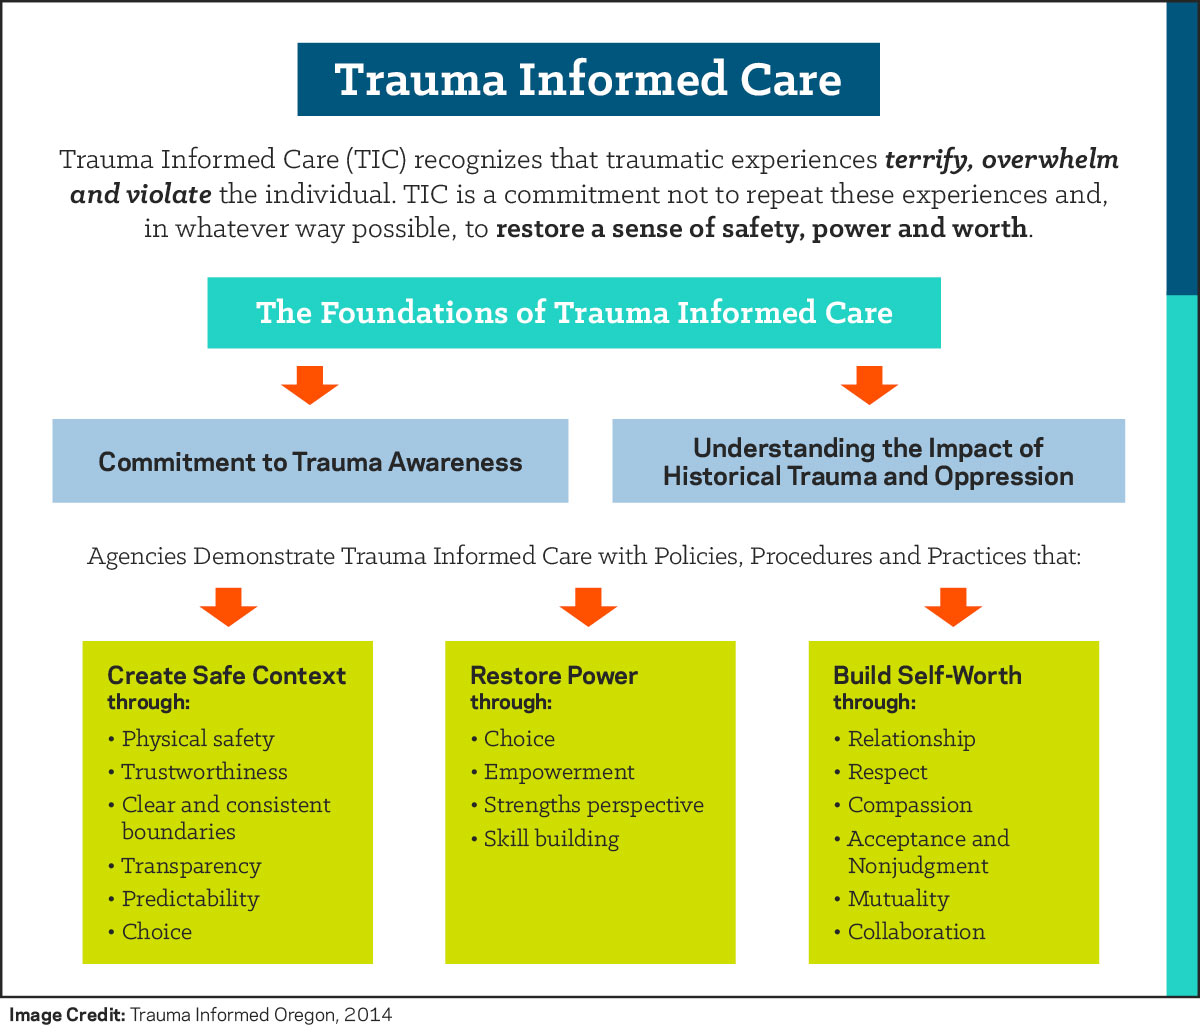 9.5 Trauma-Informed Care – Introduction to Human Services 2e